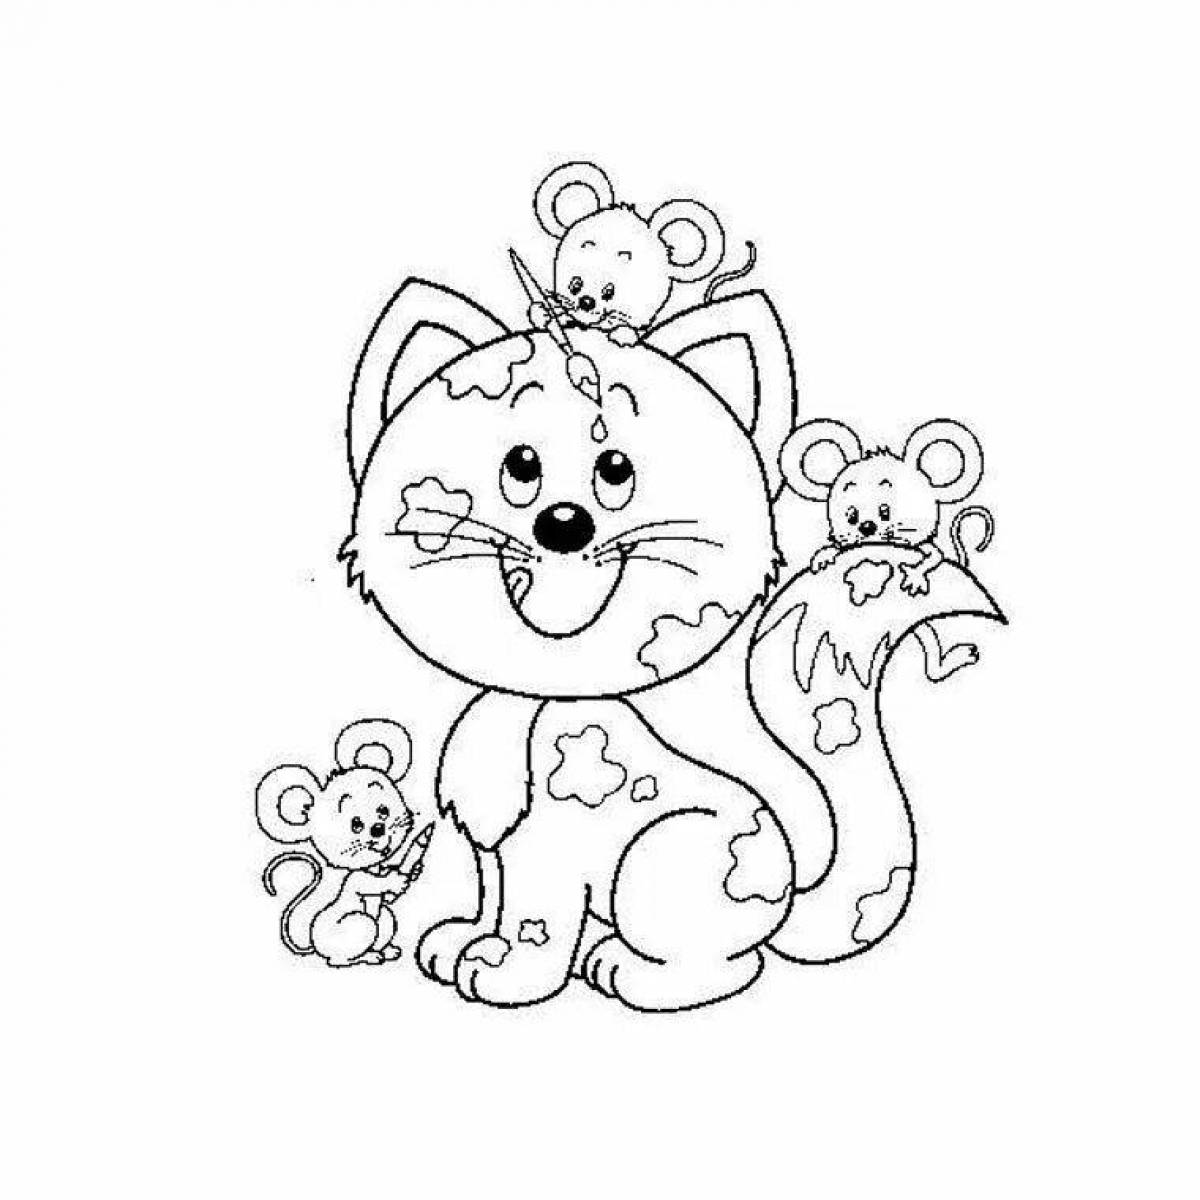 Colorful cats and mice coloring pages